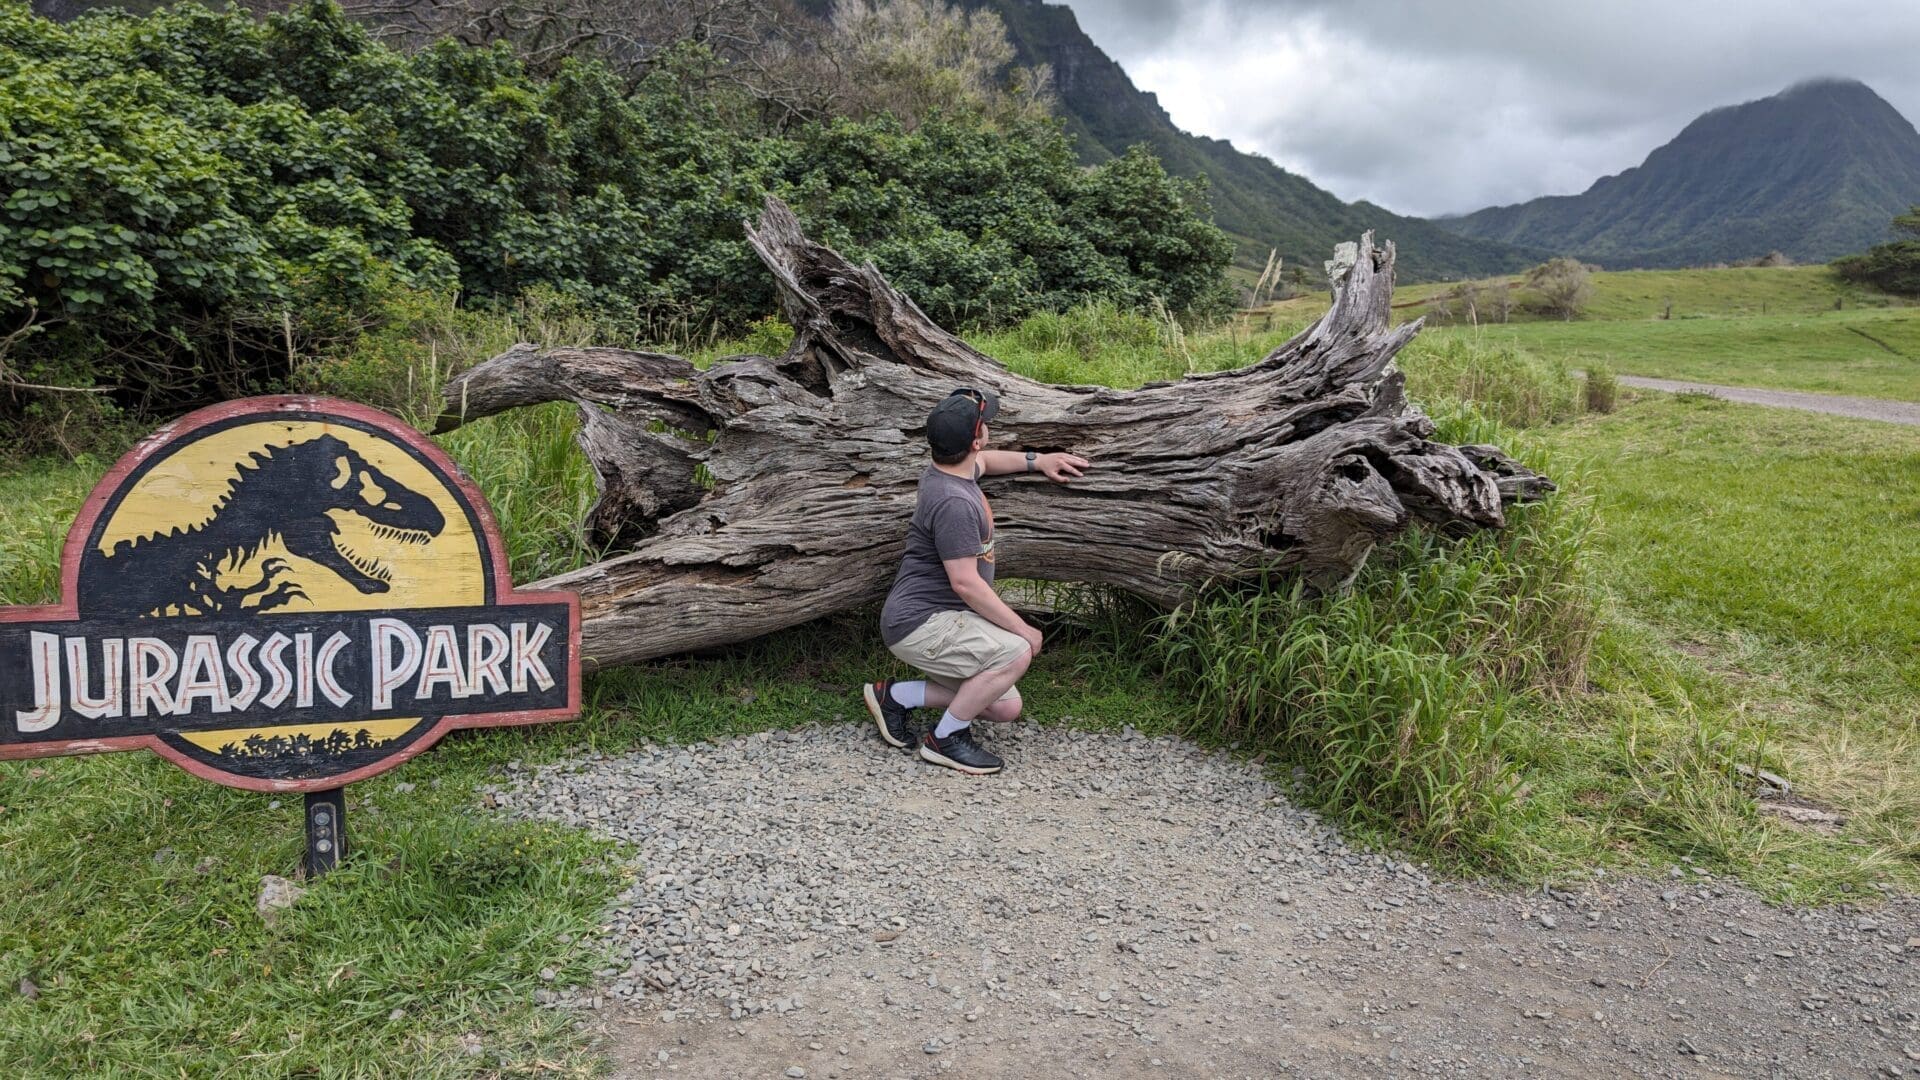 Me hiding in front of the JURASSIC PARK LOG!